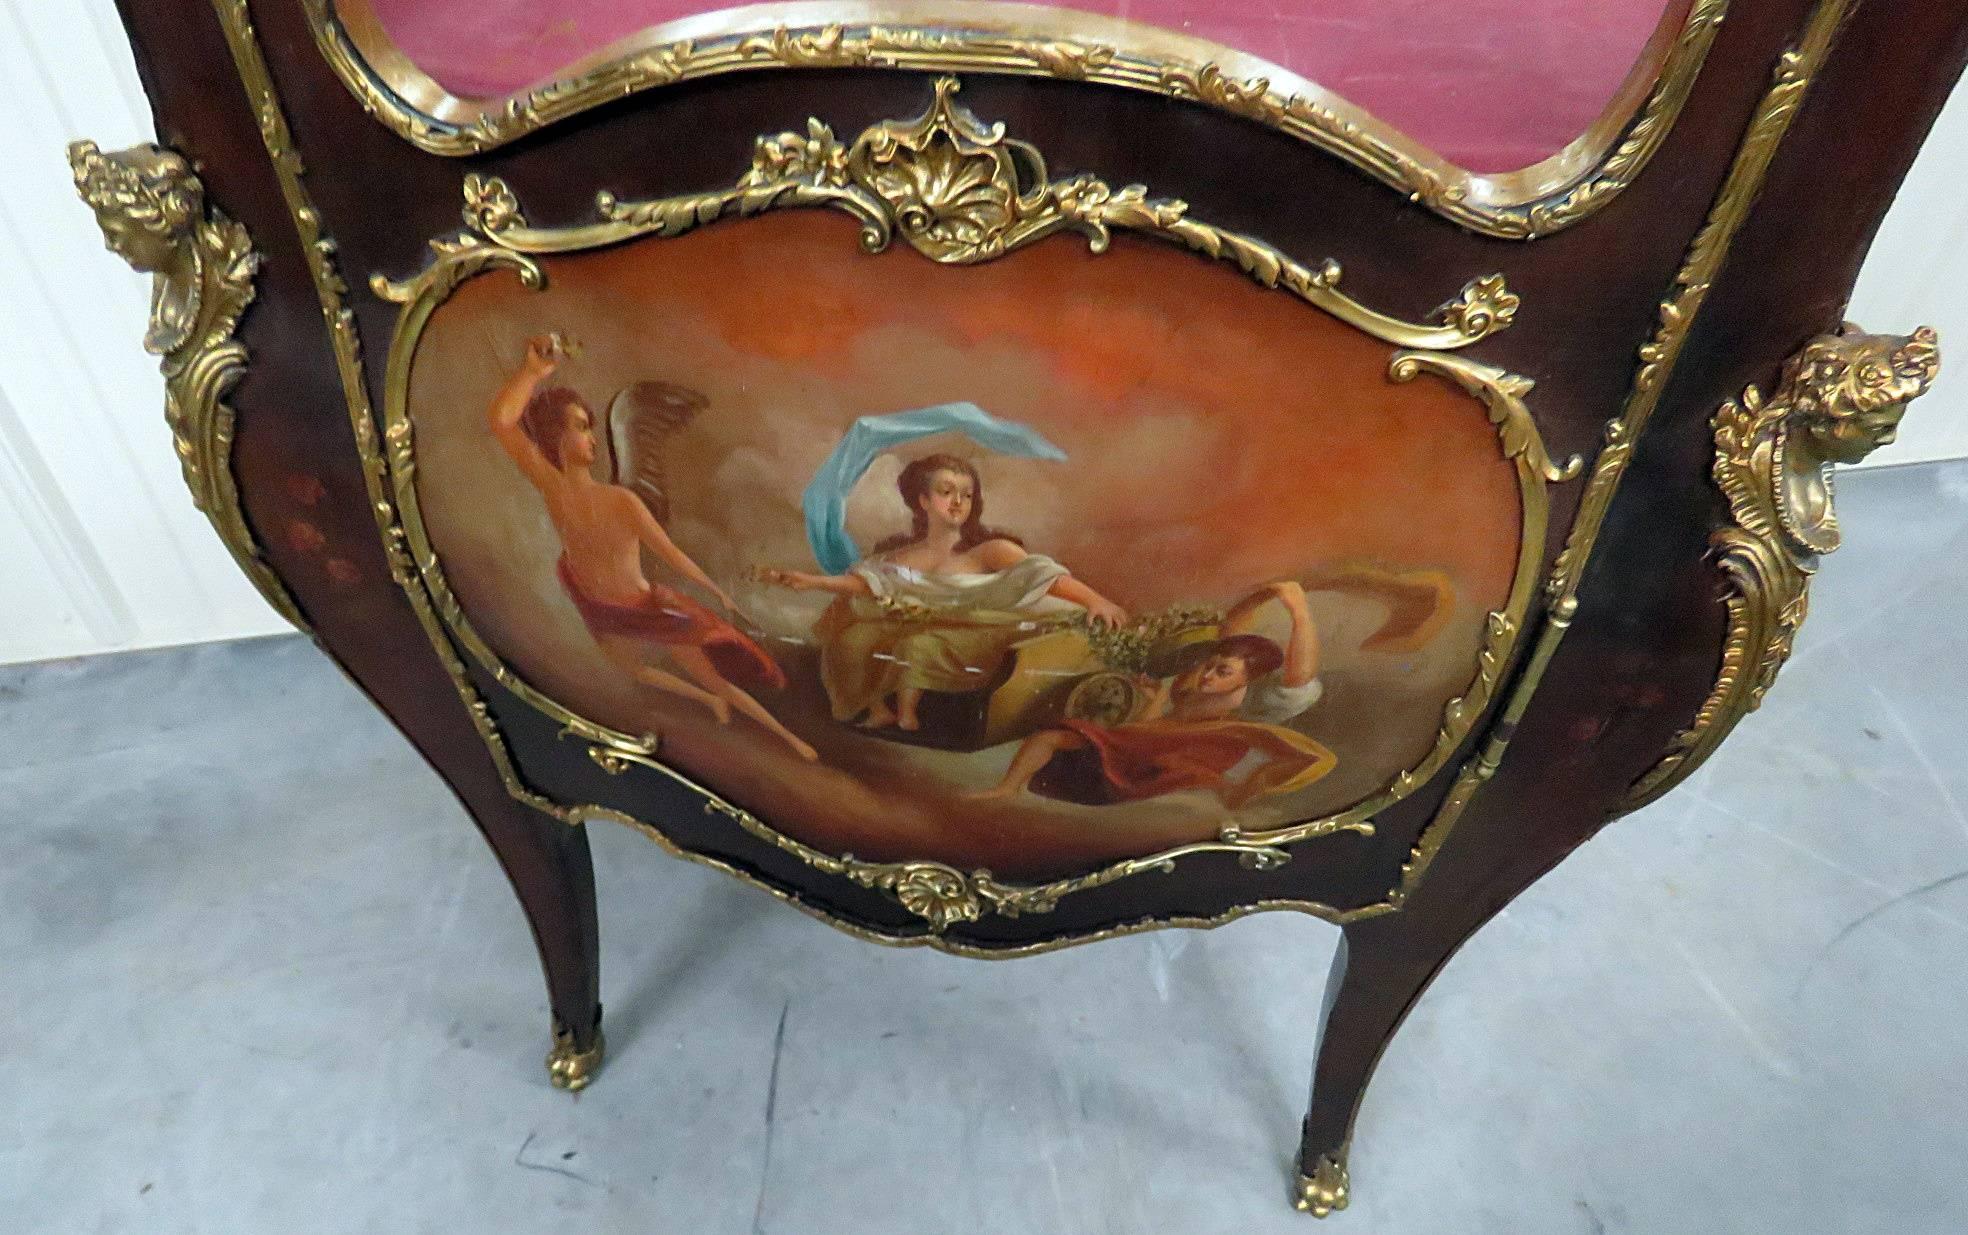 This is a fine quality Rococo 19th century Louis XV style vitrine with bronze mounts in the manner of Linke. The paint decoration is beautifully handled and has an antique crackeled finish that only time provides. This is one of the more romantic